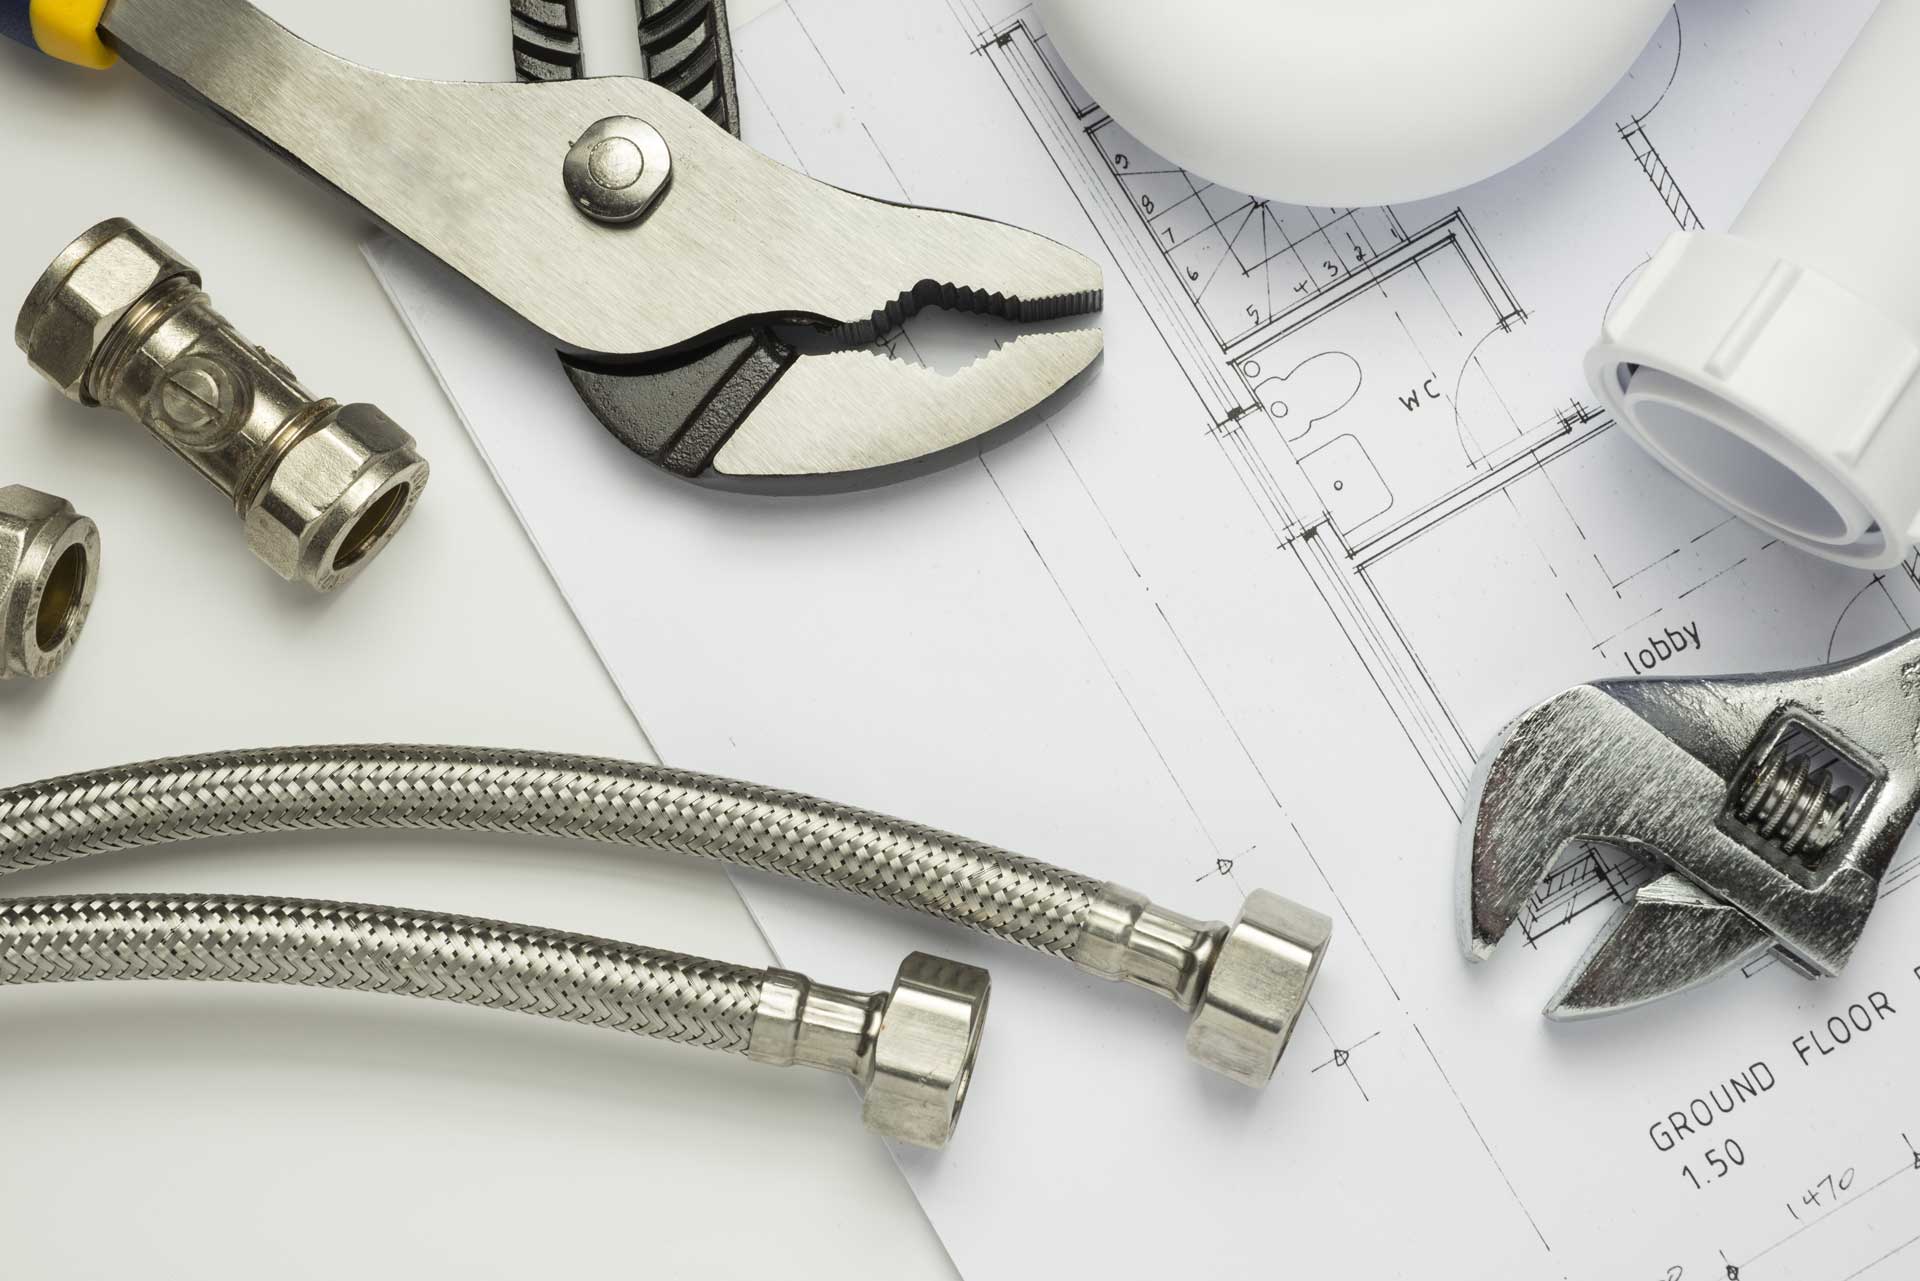 Plumbing Tools You Should Always Have In Your Home